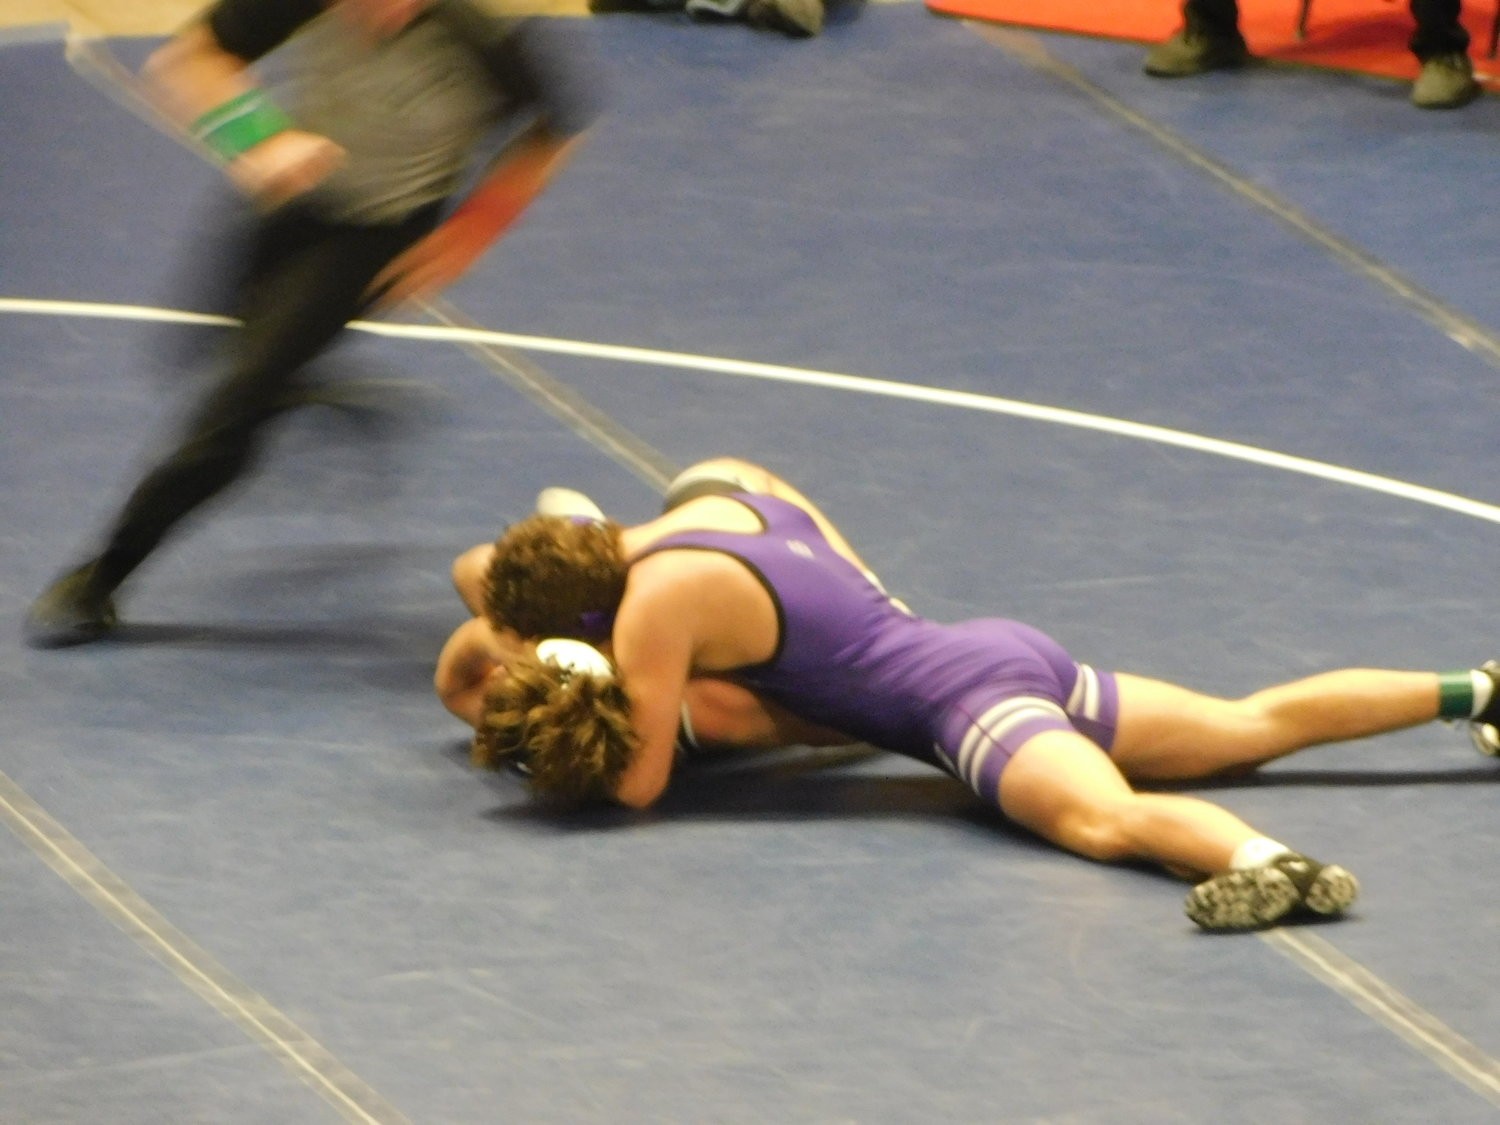 Kaleb Kurti with the pin! Goodhue 220 LBS 4th Place at Sections1 A